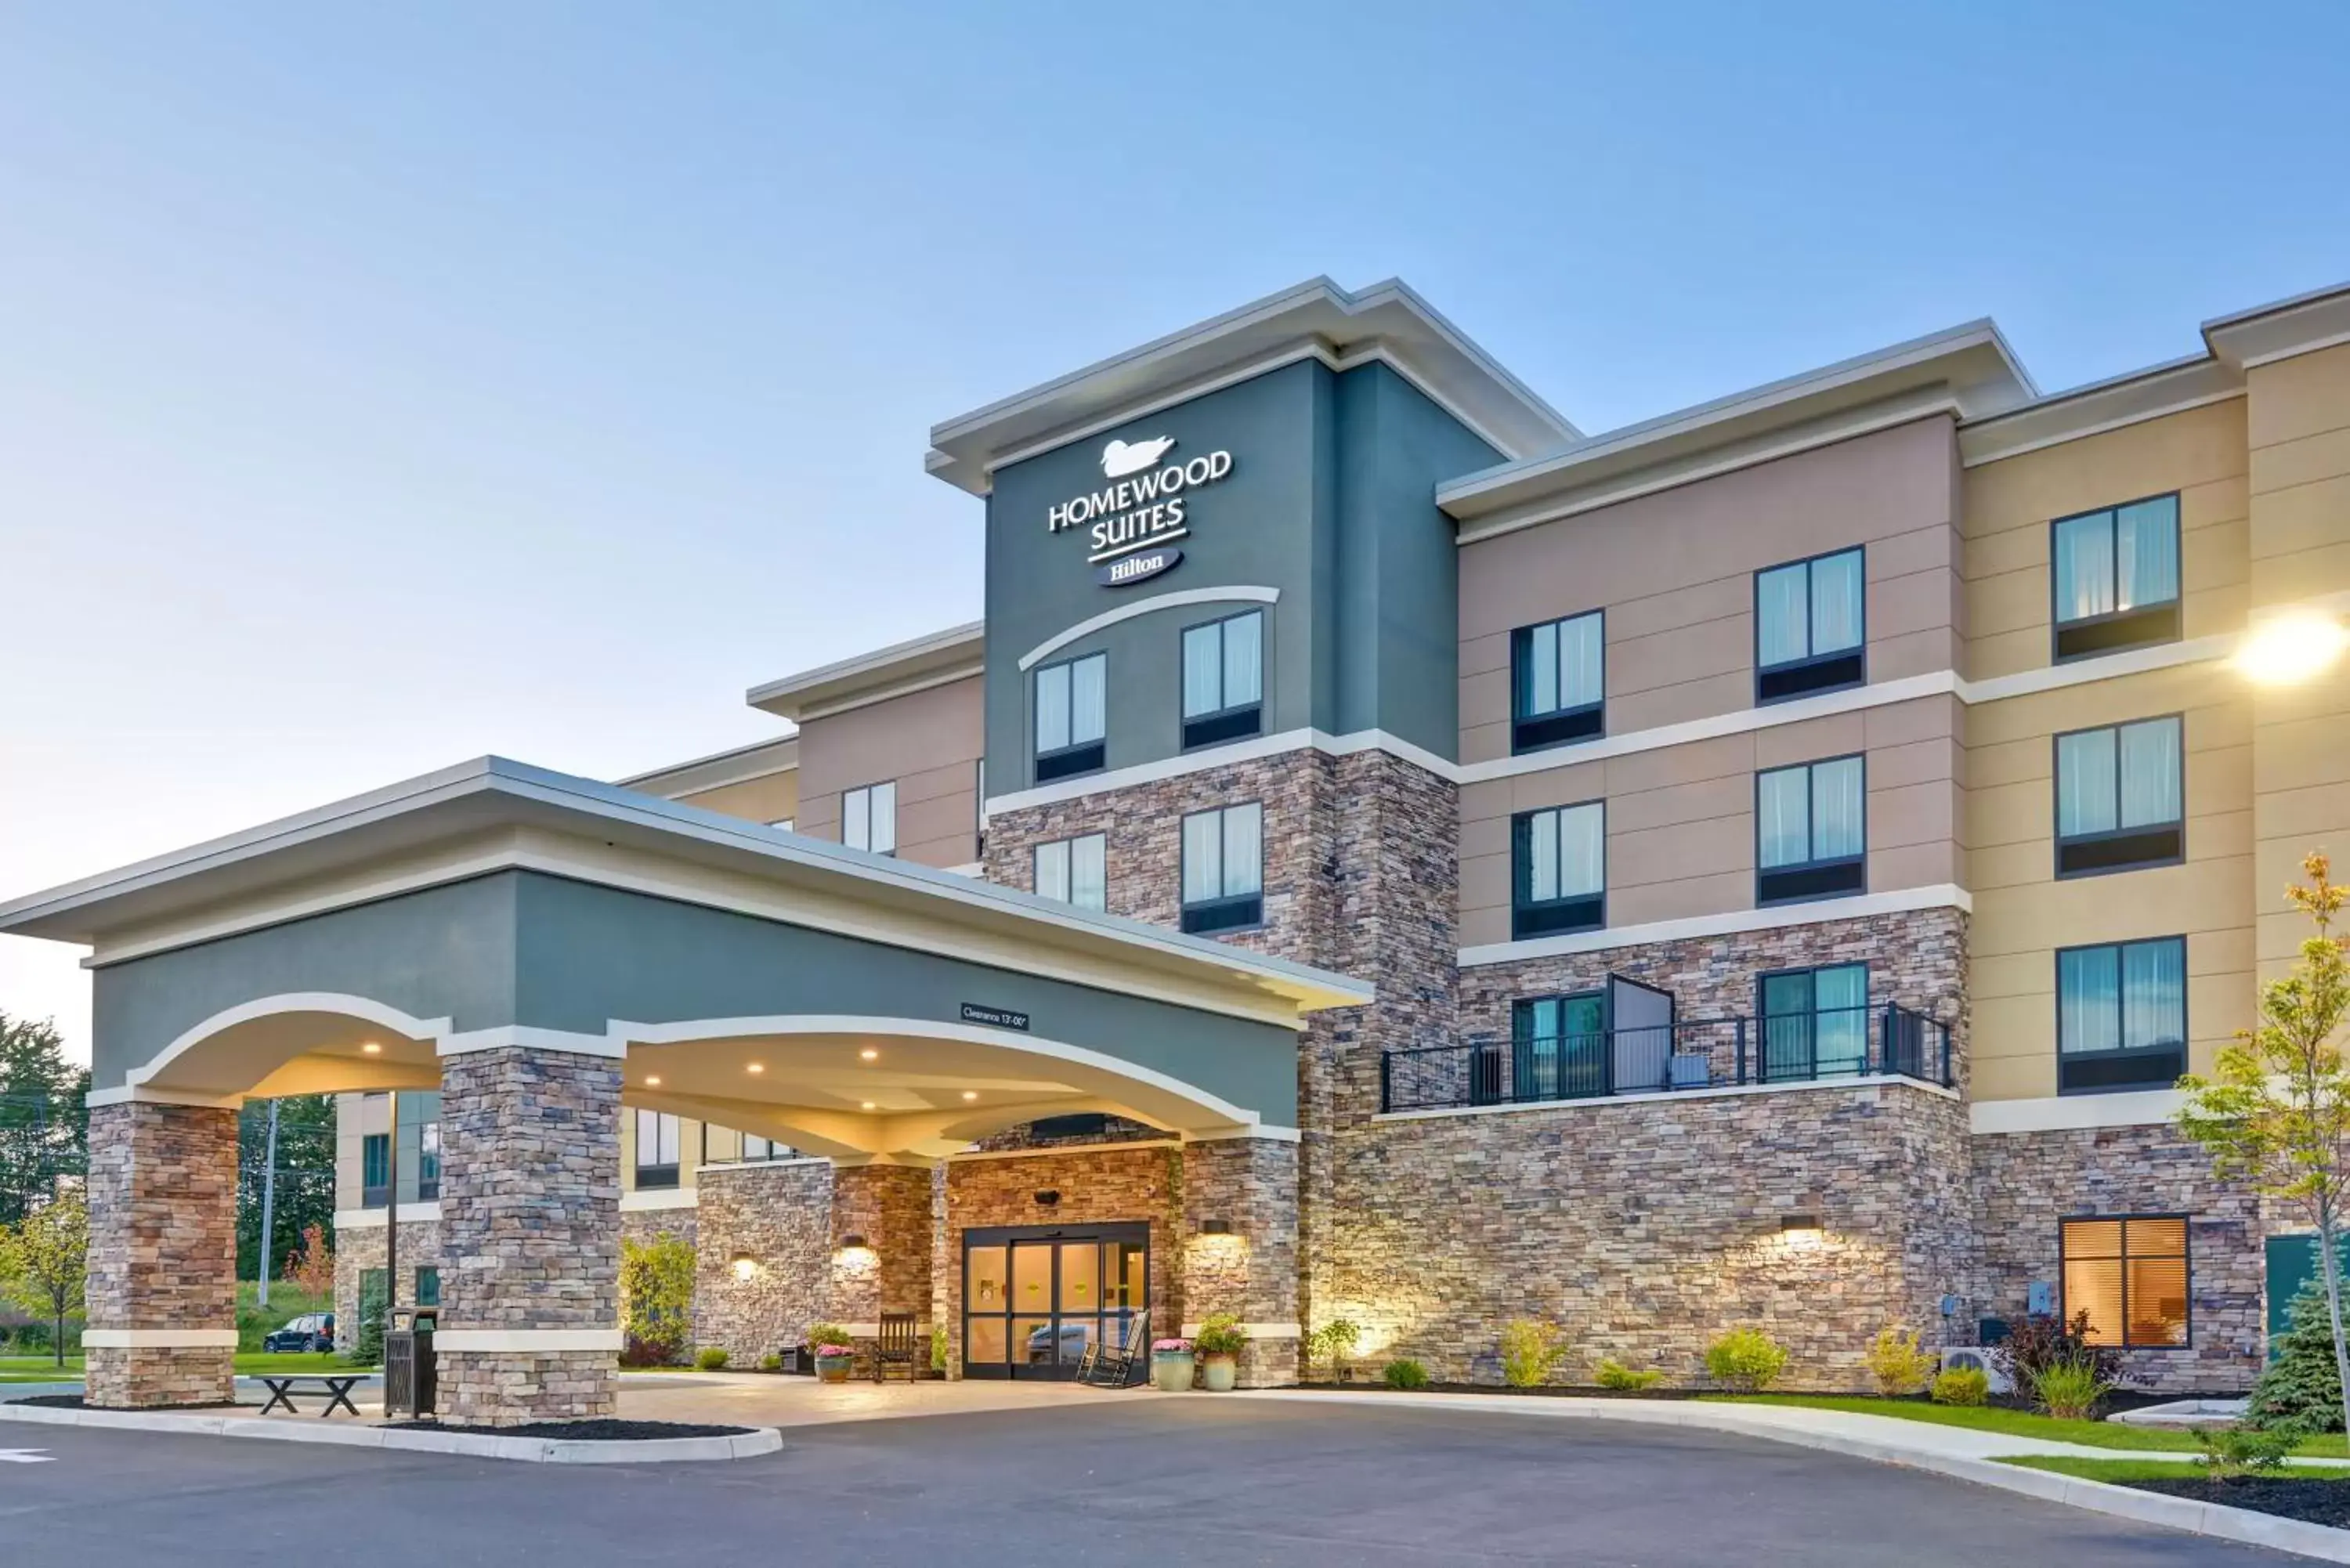 Property Building in Homewood Suites By Hilton New Hartford Utica